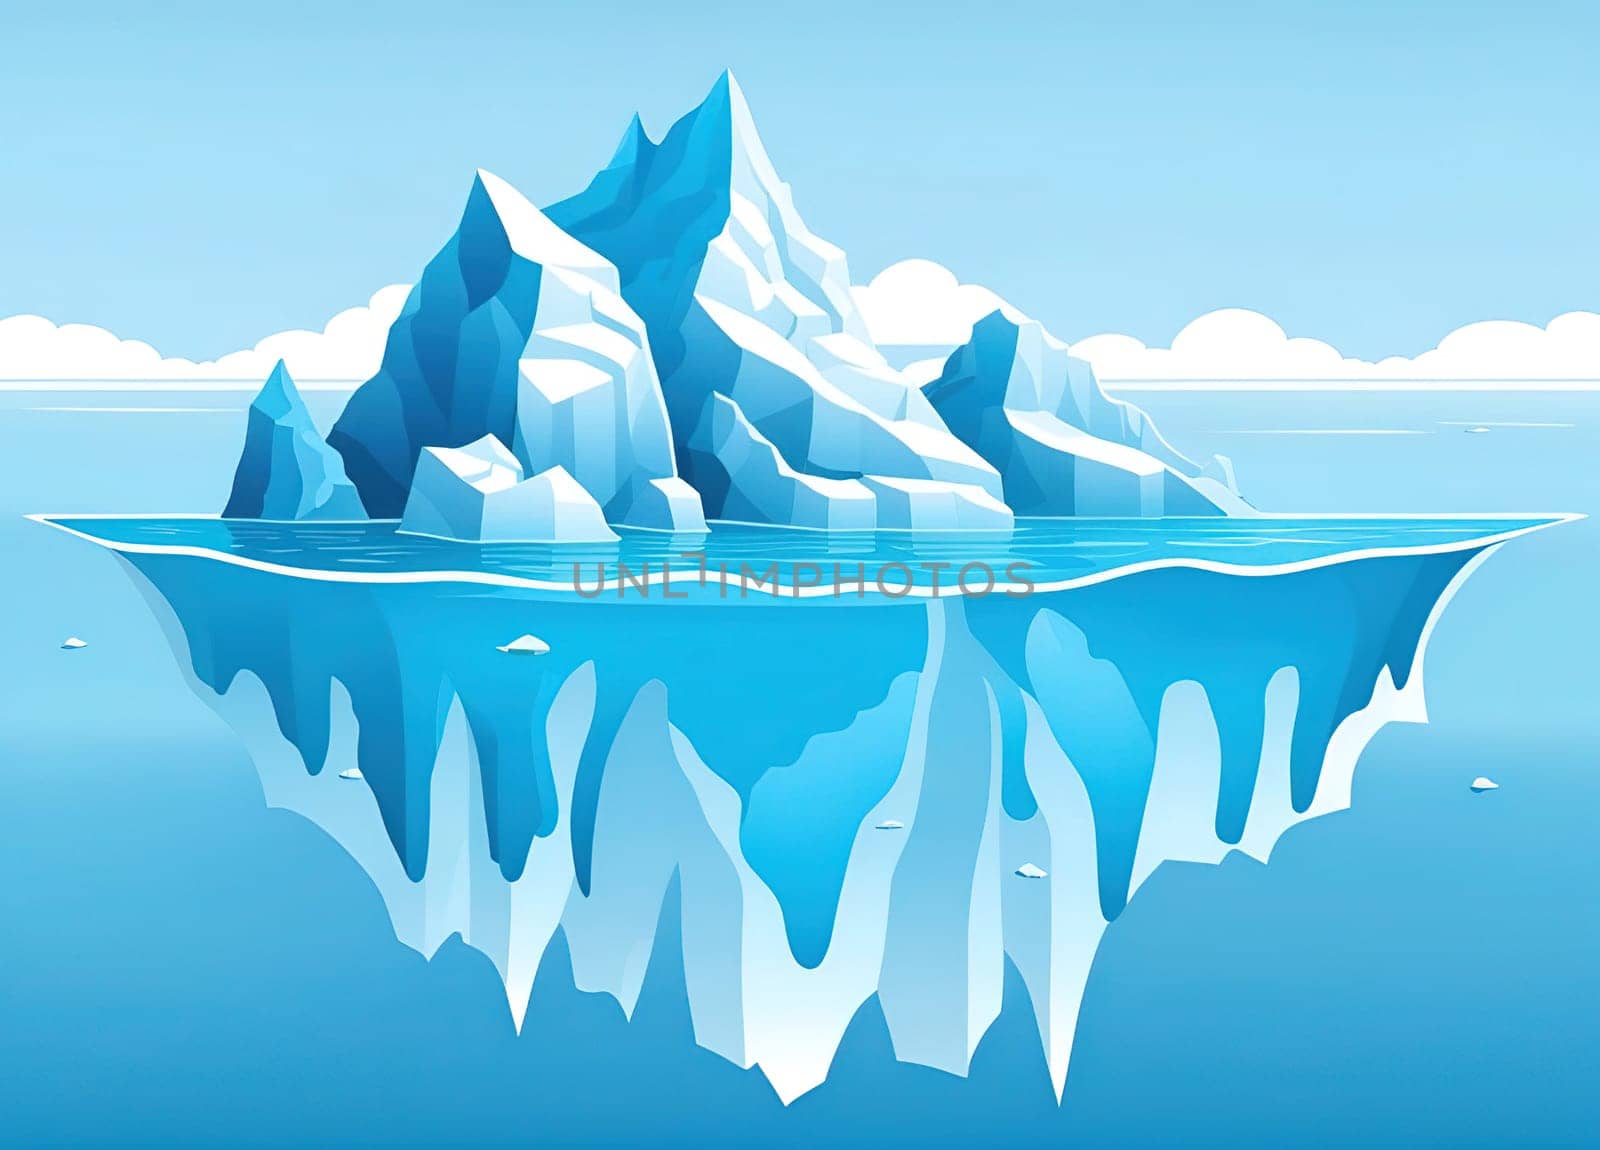 Illustration of Iceberg with reflection in water. Floating icebergs in the ocean. Vector illustration for your design.